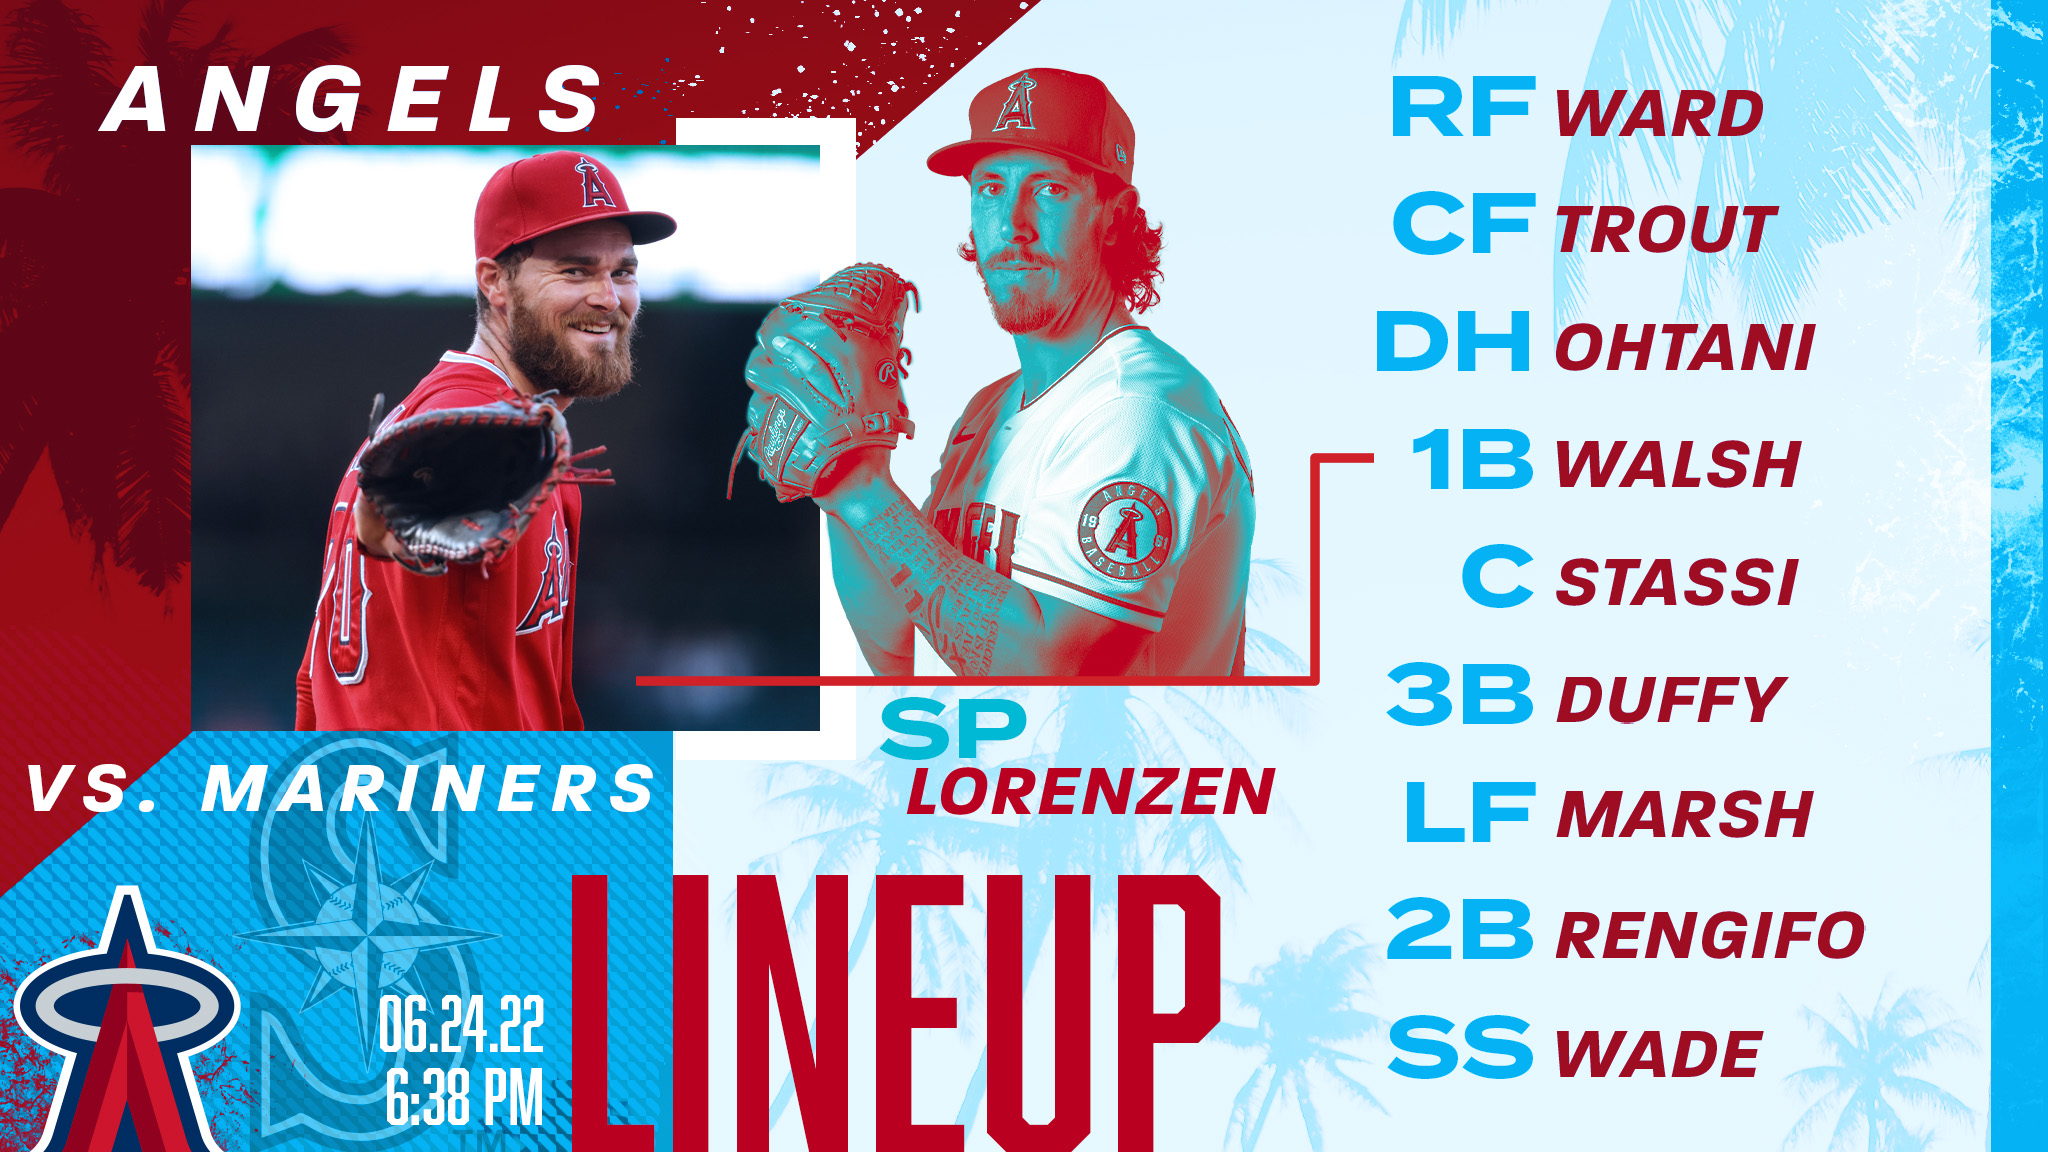 June 24 lineup with Lorenzen on the mound